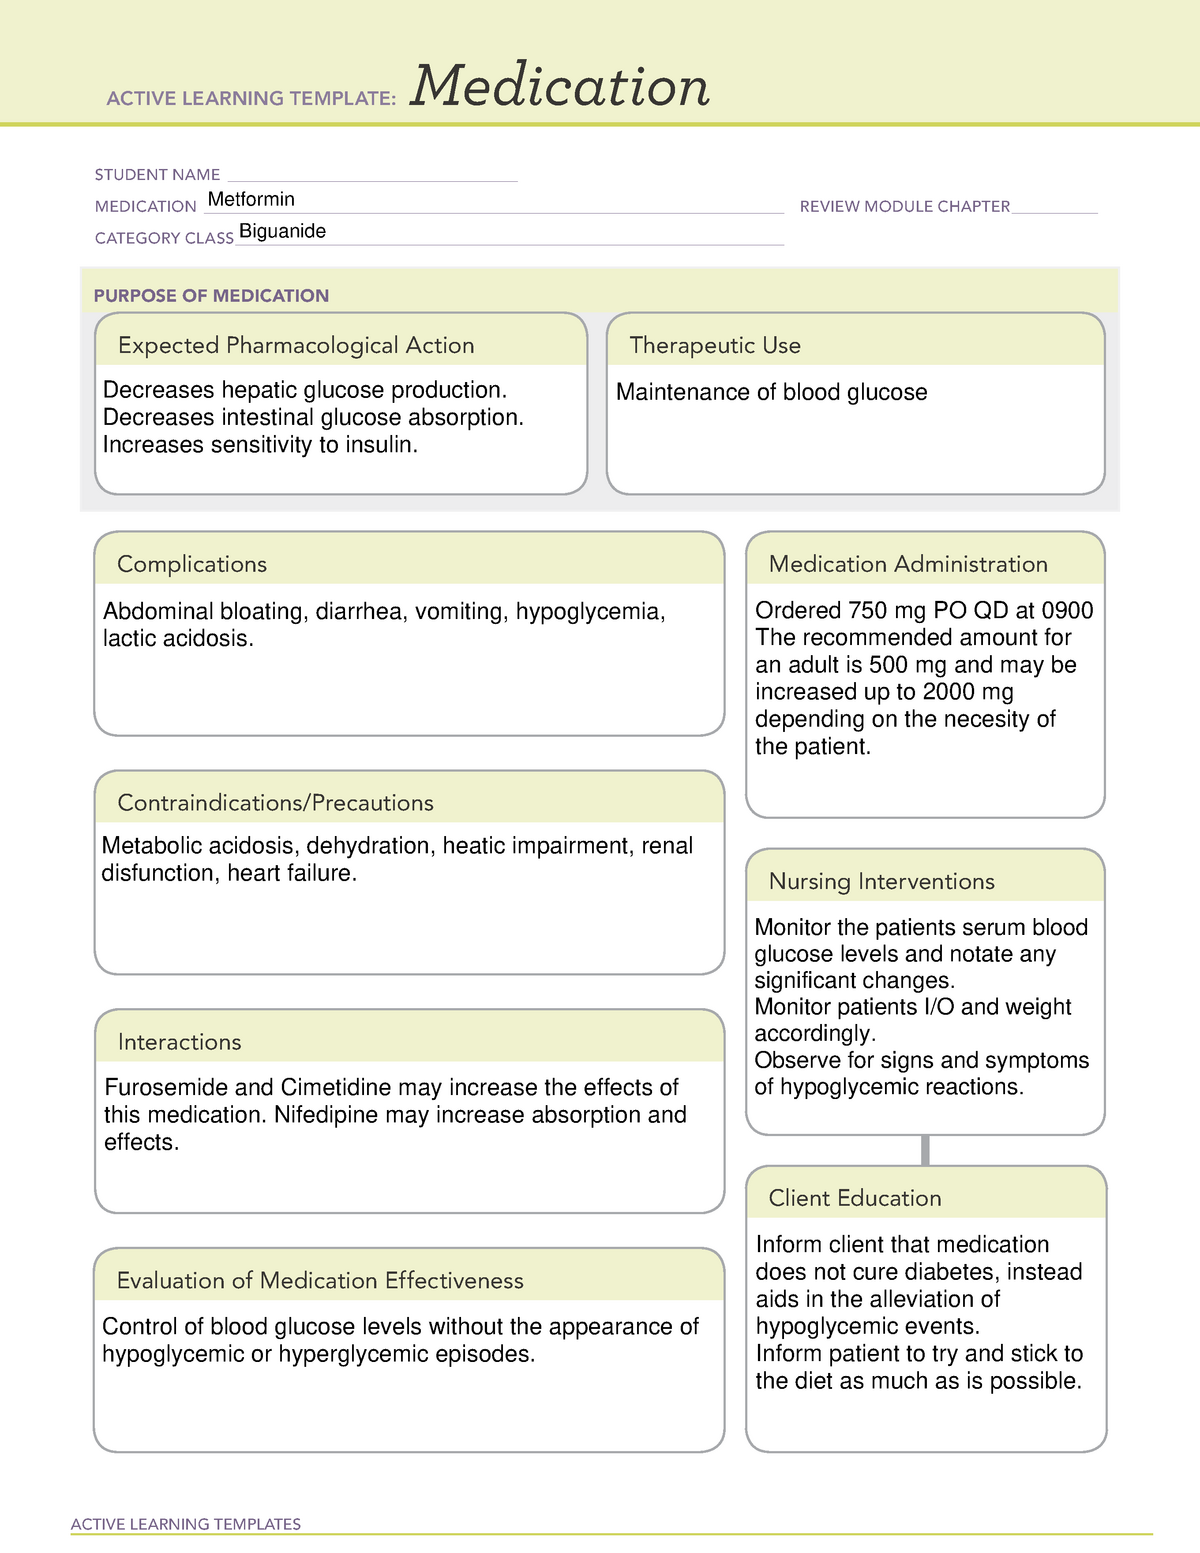 Meformin - Med card - ACTIVE LEARNING TEMPLATES Medication STUDENT For Med Cards Template